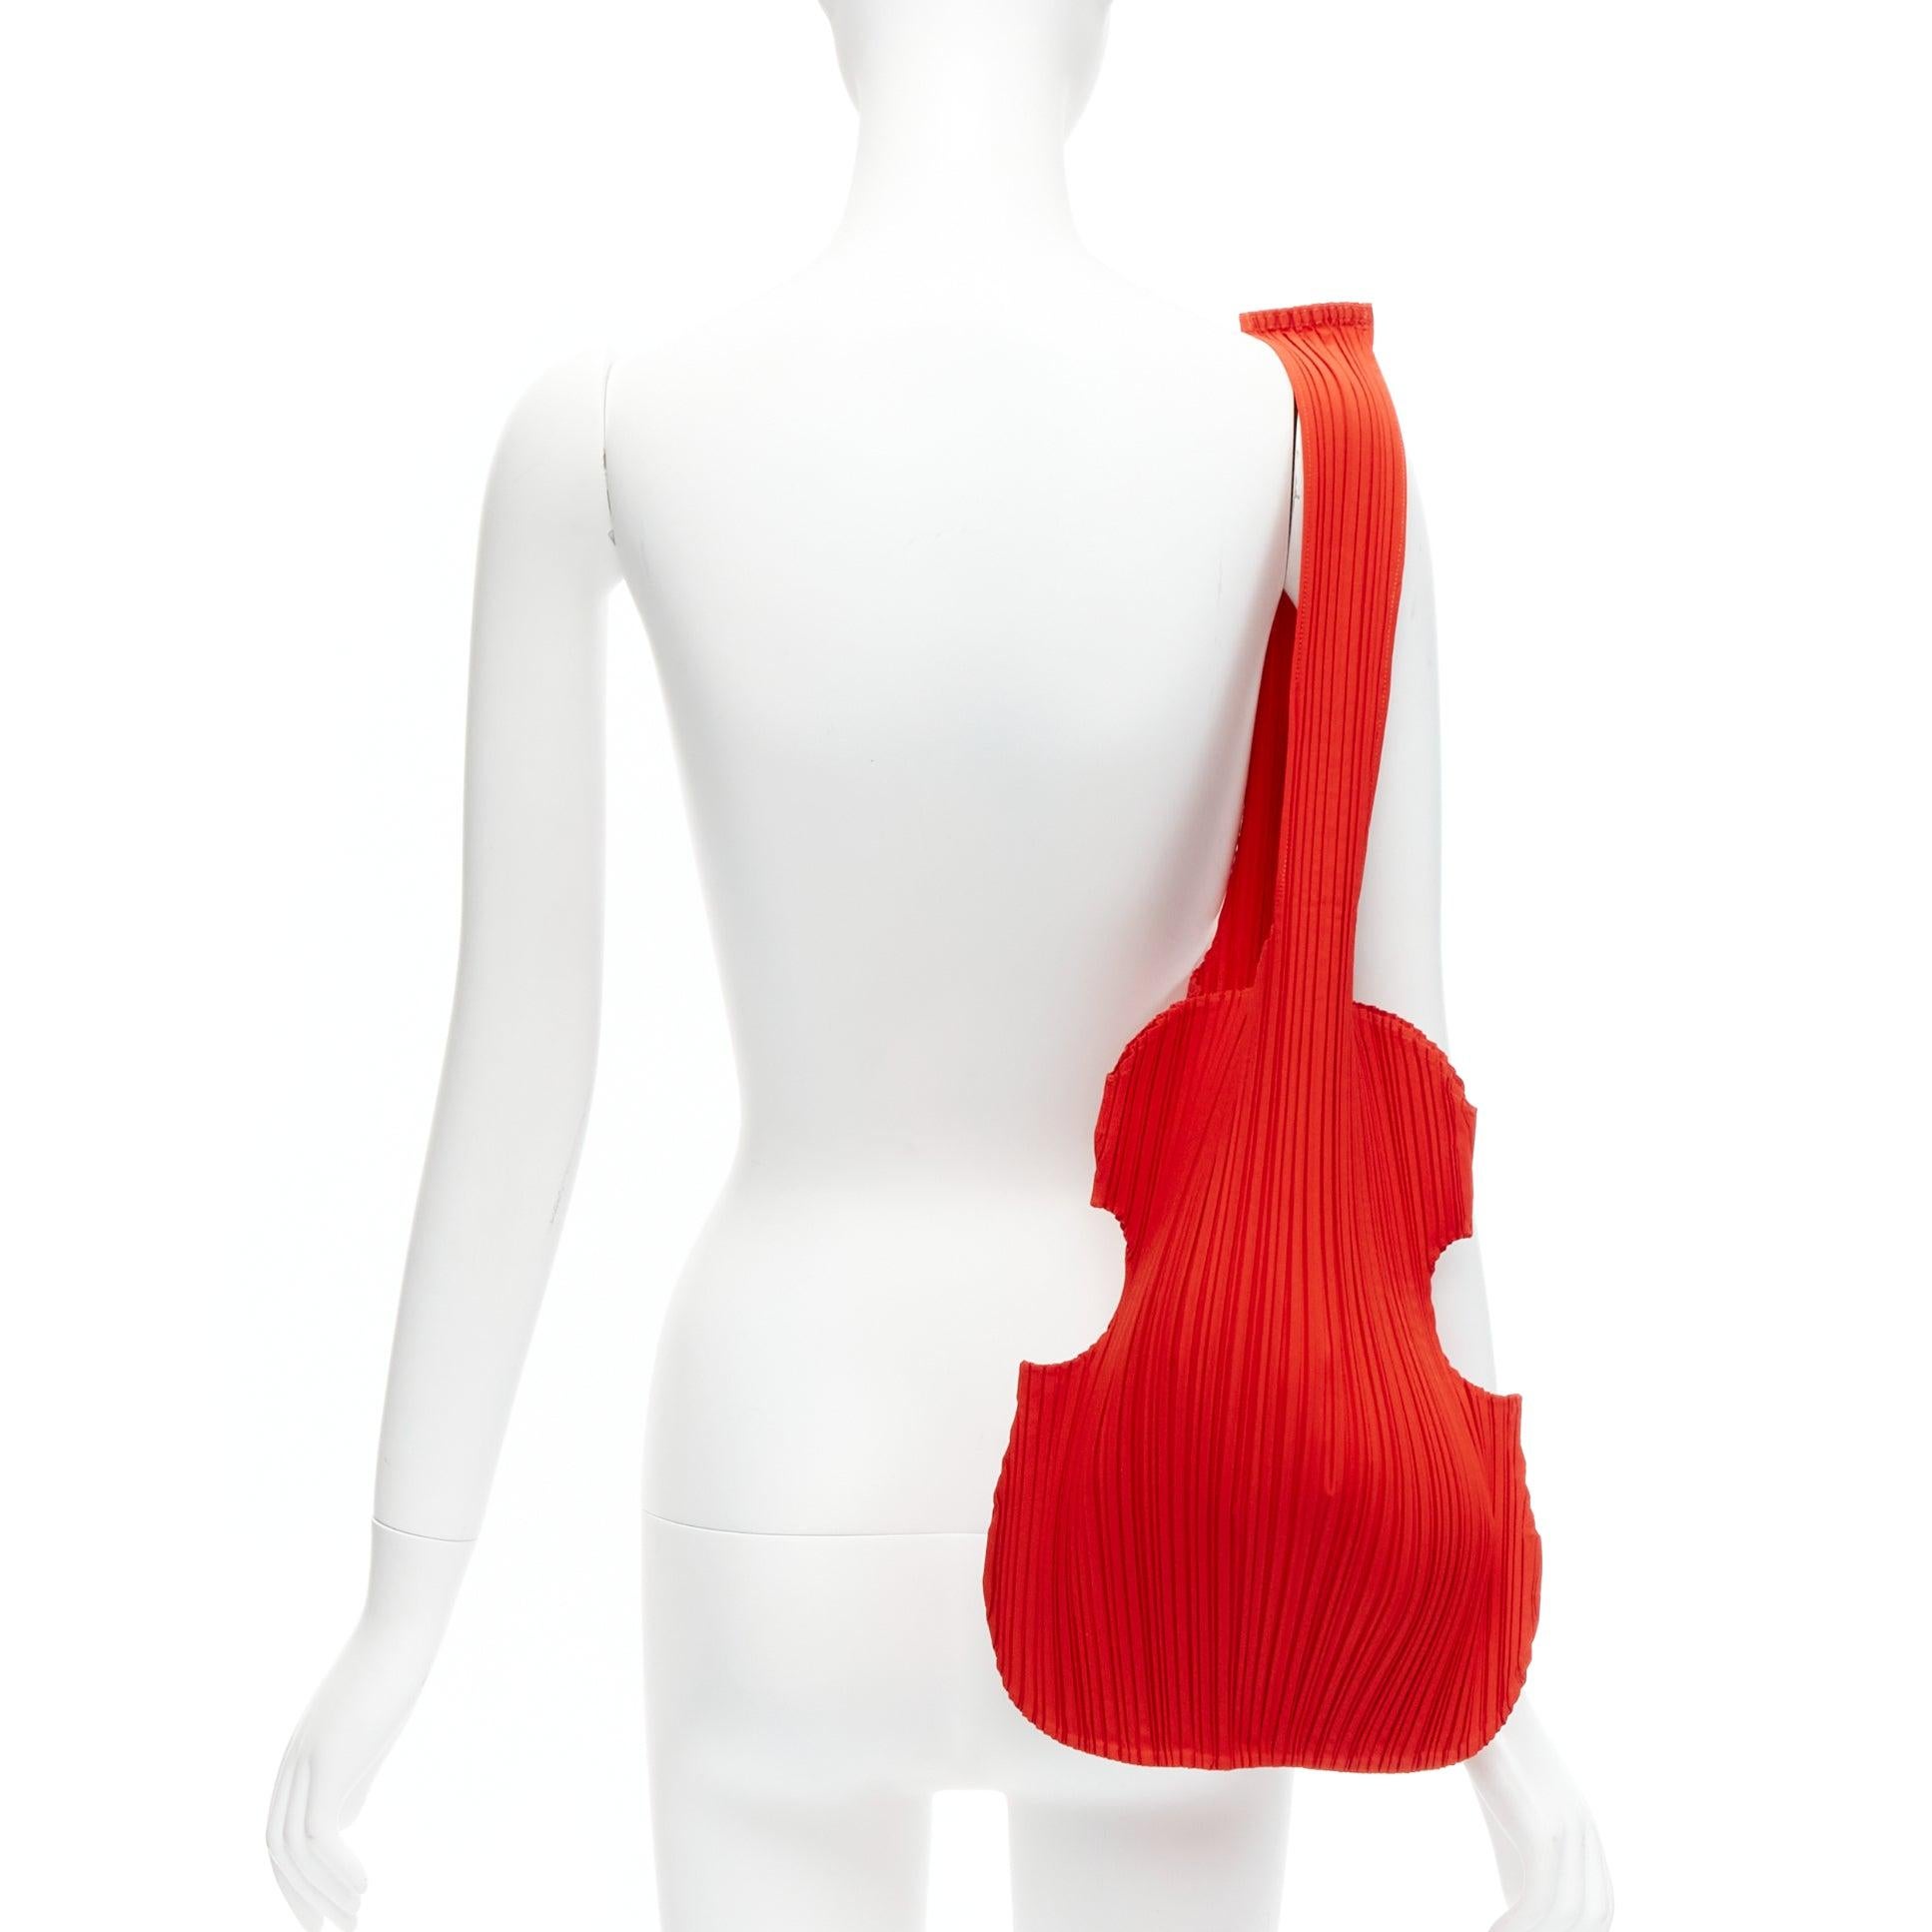 ISSEY MIYAKE PLEATS PLEASE rare limited edition red plisse guitar tote bag
Reference: TGAS/D00601
Brand: Issey Miyake
Collection: Pleats Please 2020
Material: Fabric
Color: Red
Pattern: Solid
Closure: Open Top
Extra Details: Design cut in a Guitar